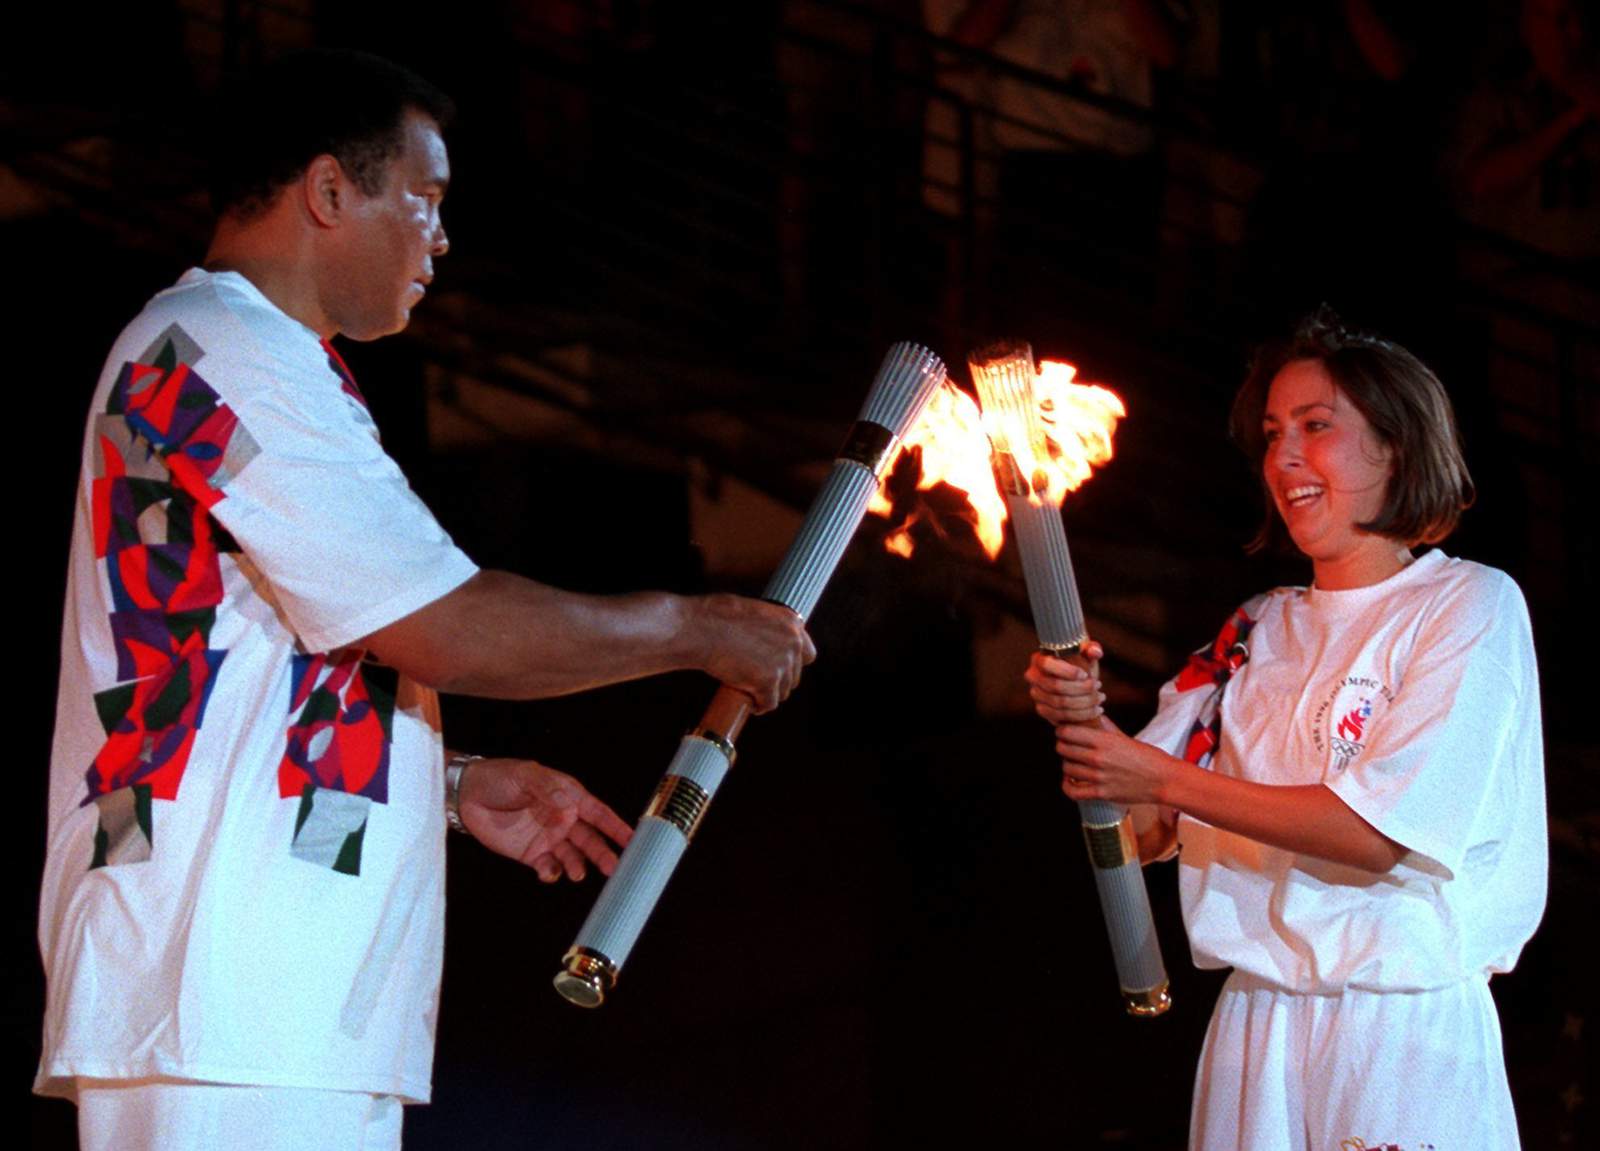 A flame, a look, one of the Olympics' most powerful moments